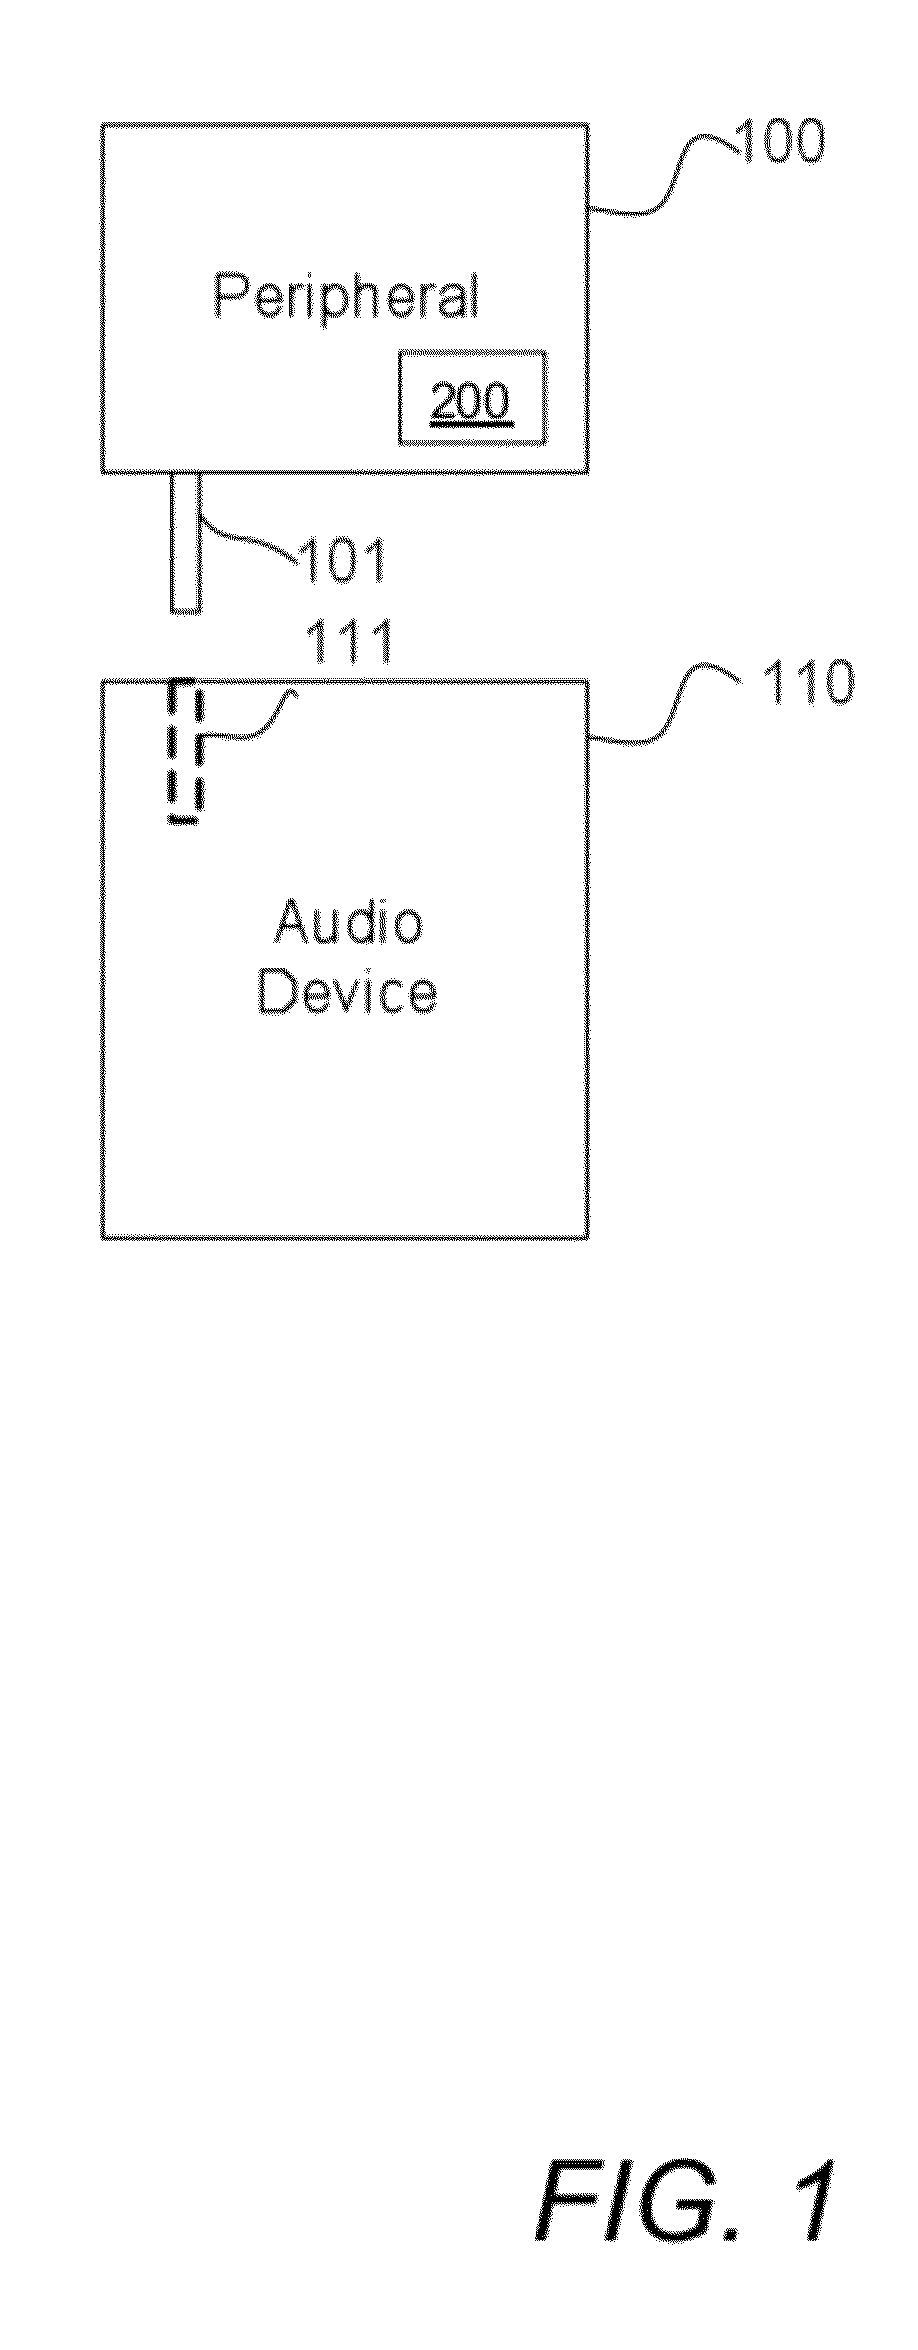 Power management circuitry in peripheral accessories of audio devices